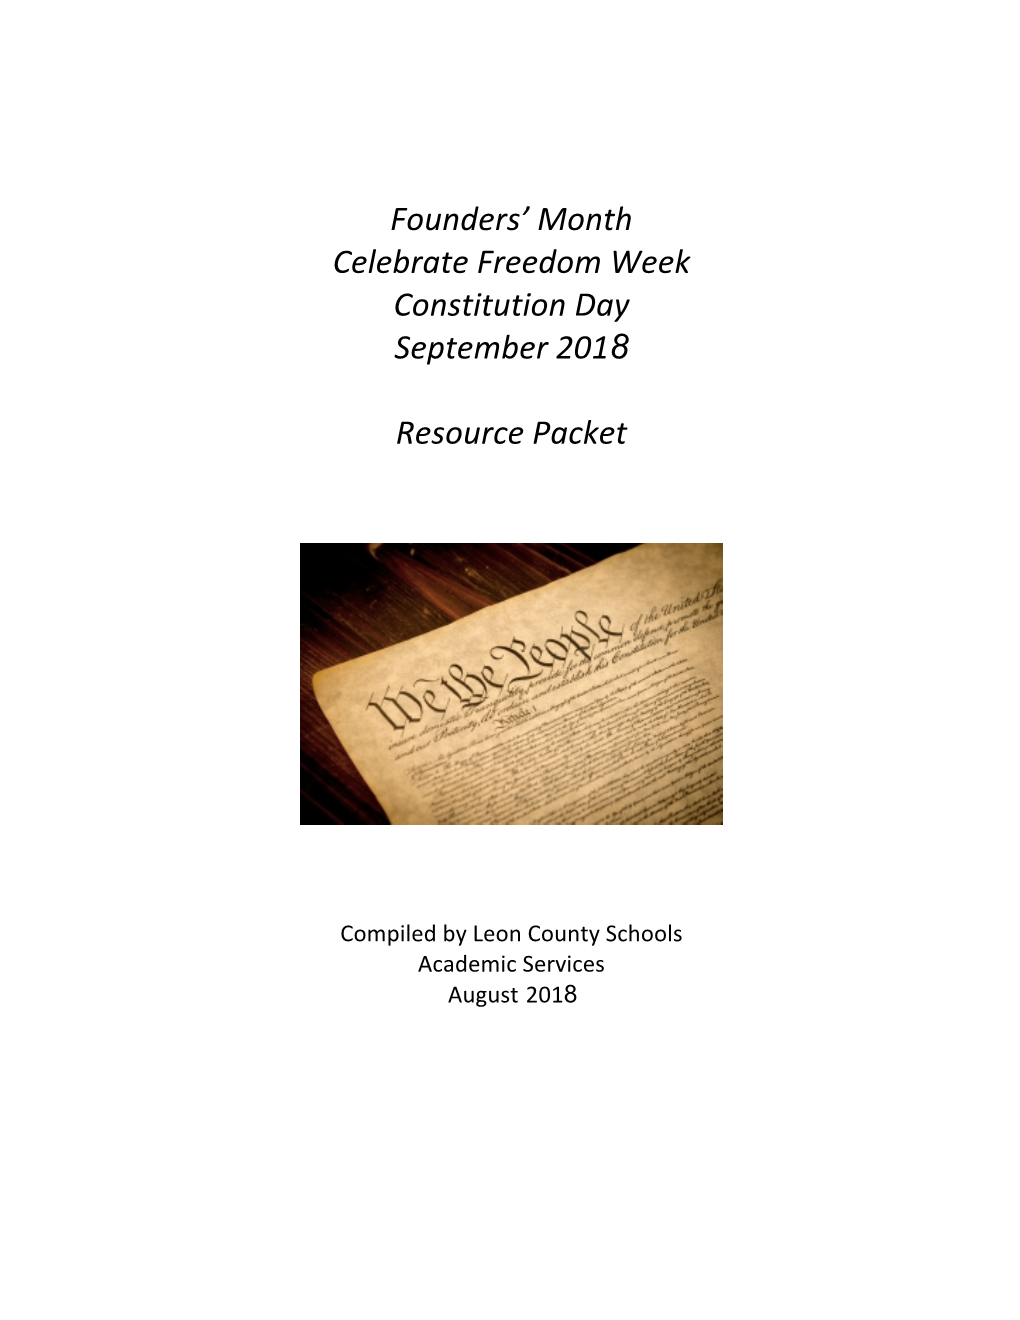 Founders' Month Celebrate Freedom Week Constitution Day September